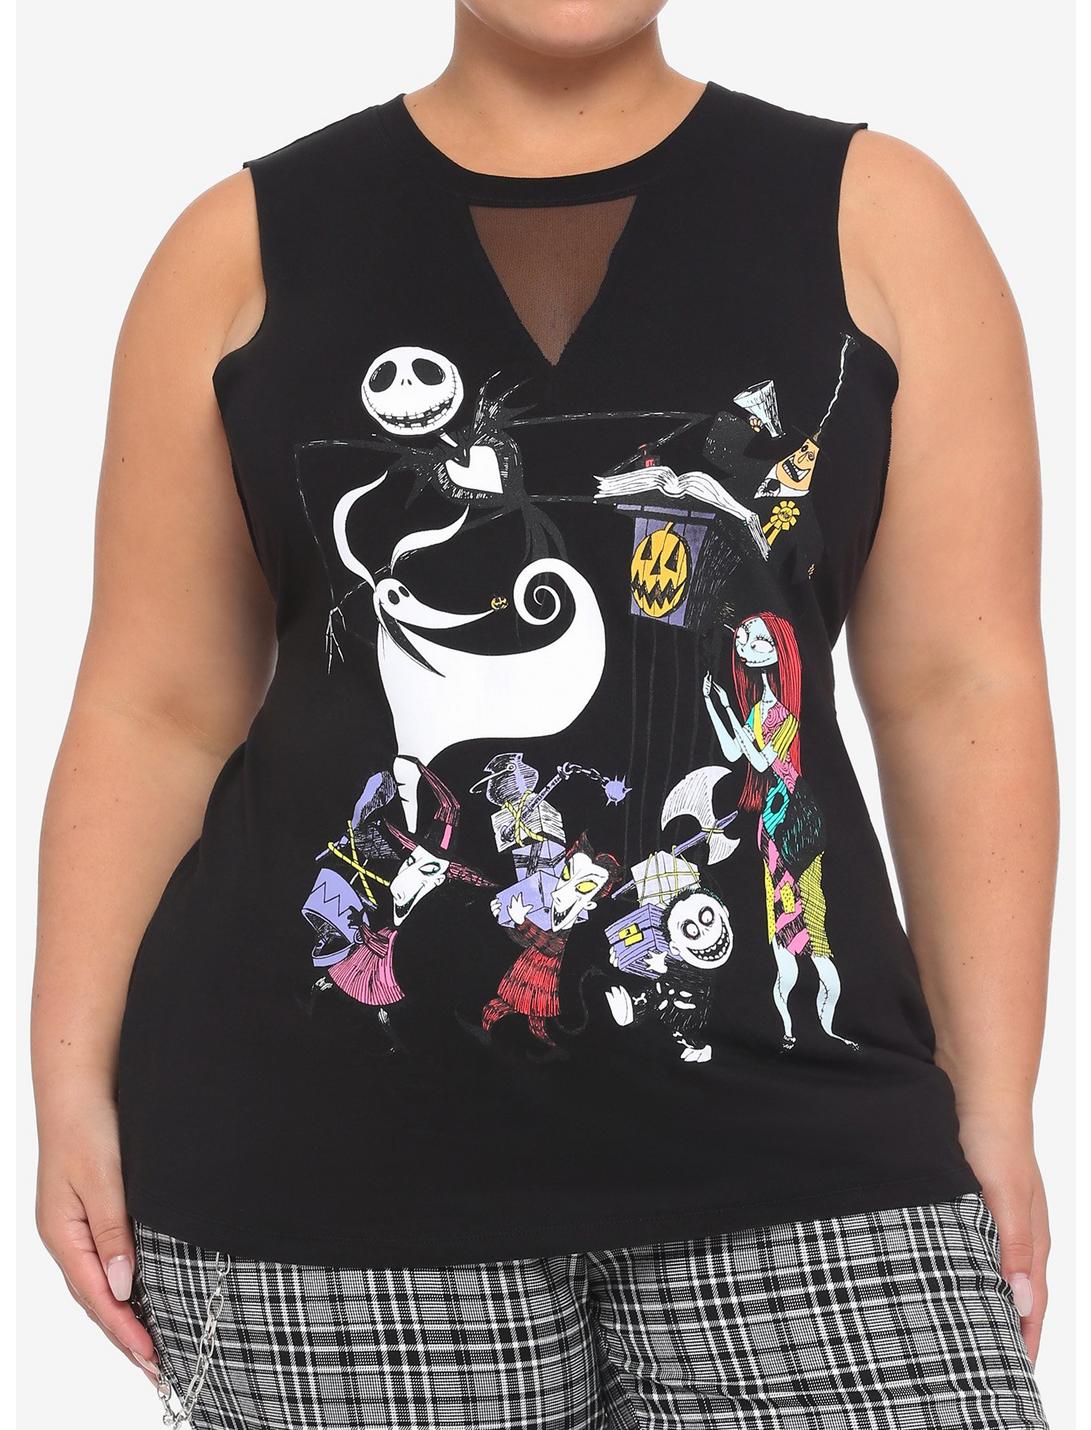 The Nightmare Before Christmas Group Mesh Insert Girls Muscle Top Plus Size, MULTI, hi-res